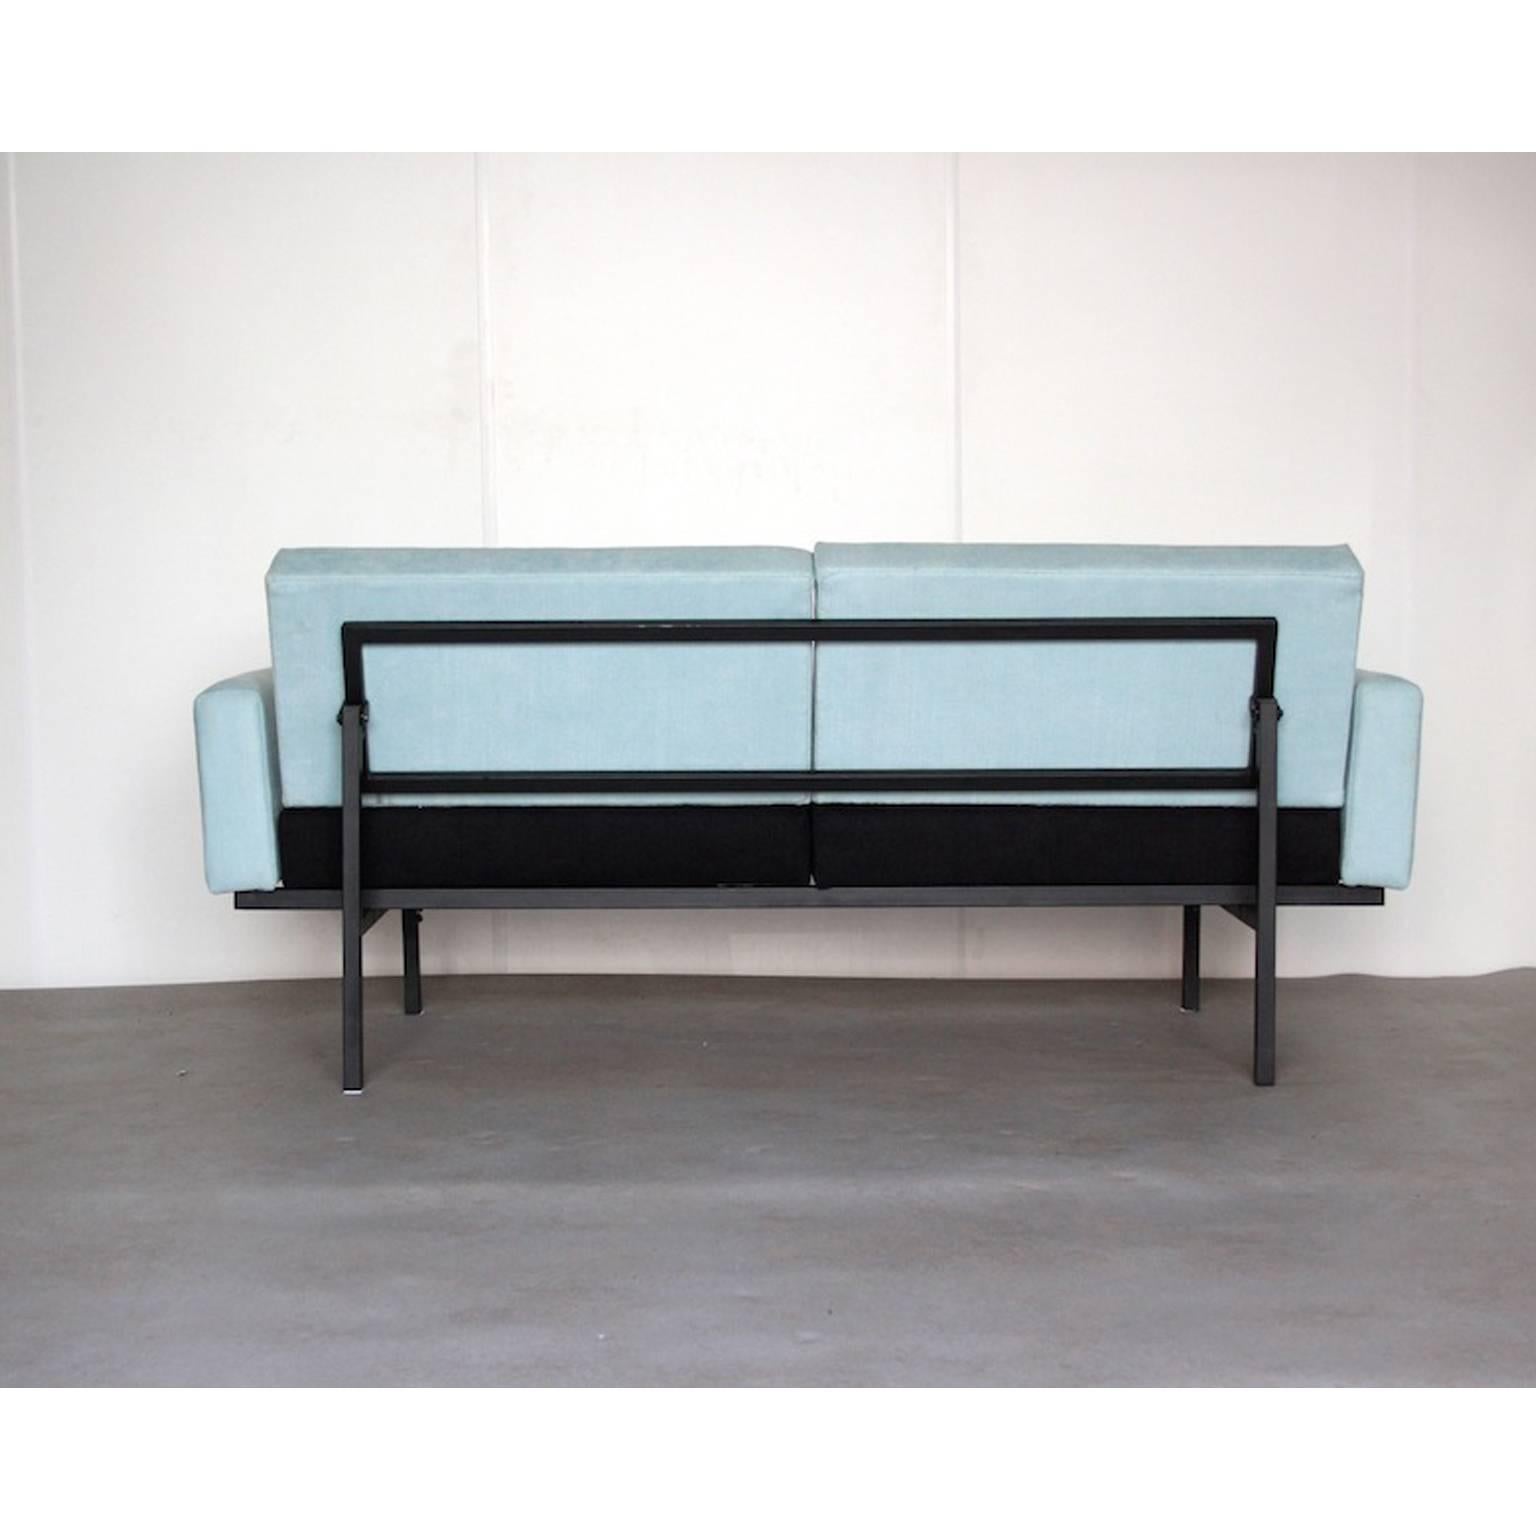 Mid-Century Modern Sofa or Daybed by Coen de Vries for Devo, Dutch Design, 1952 For Sale